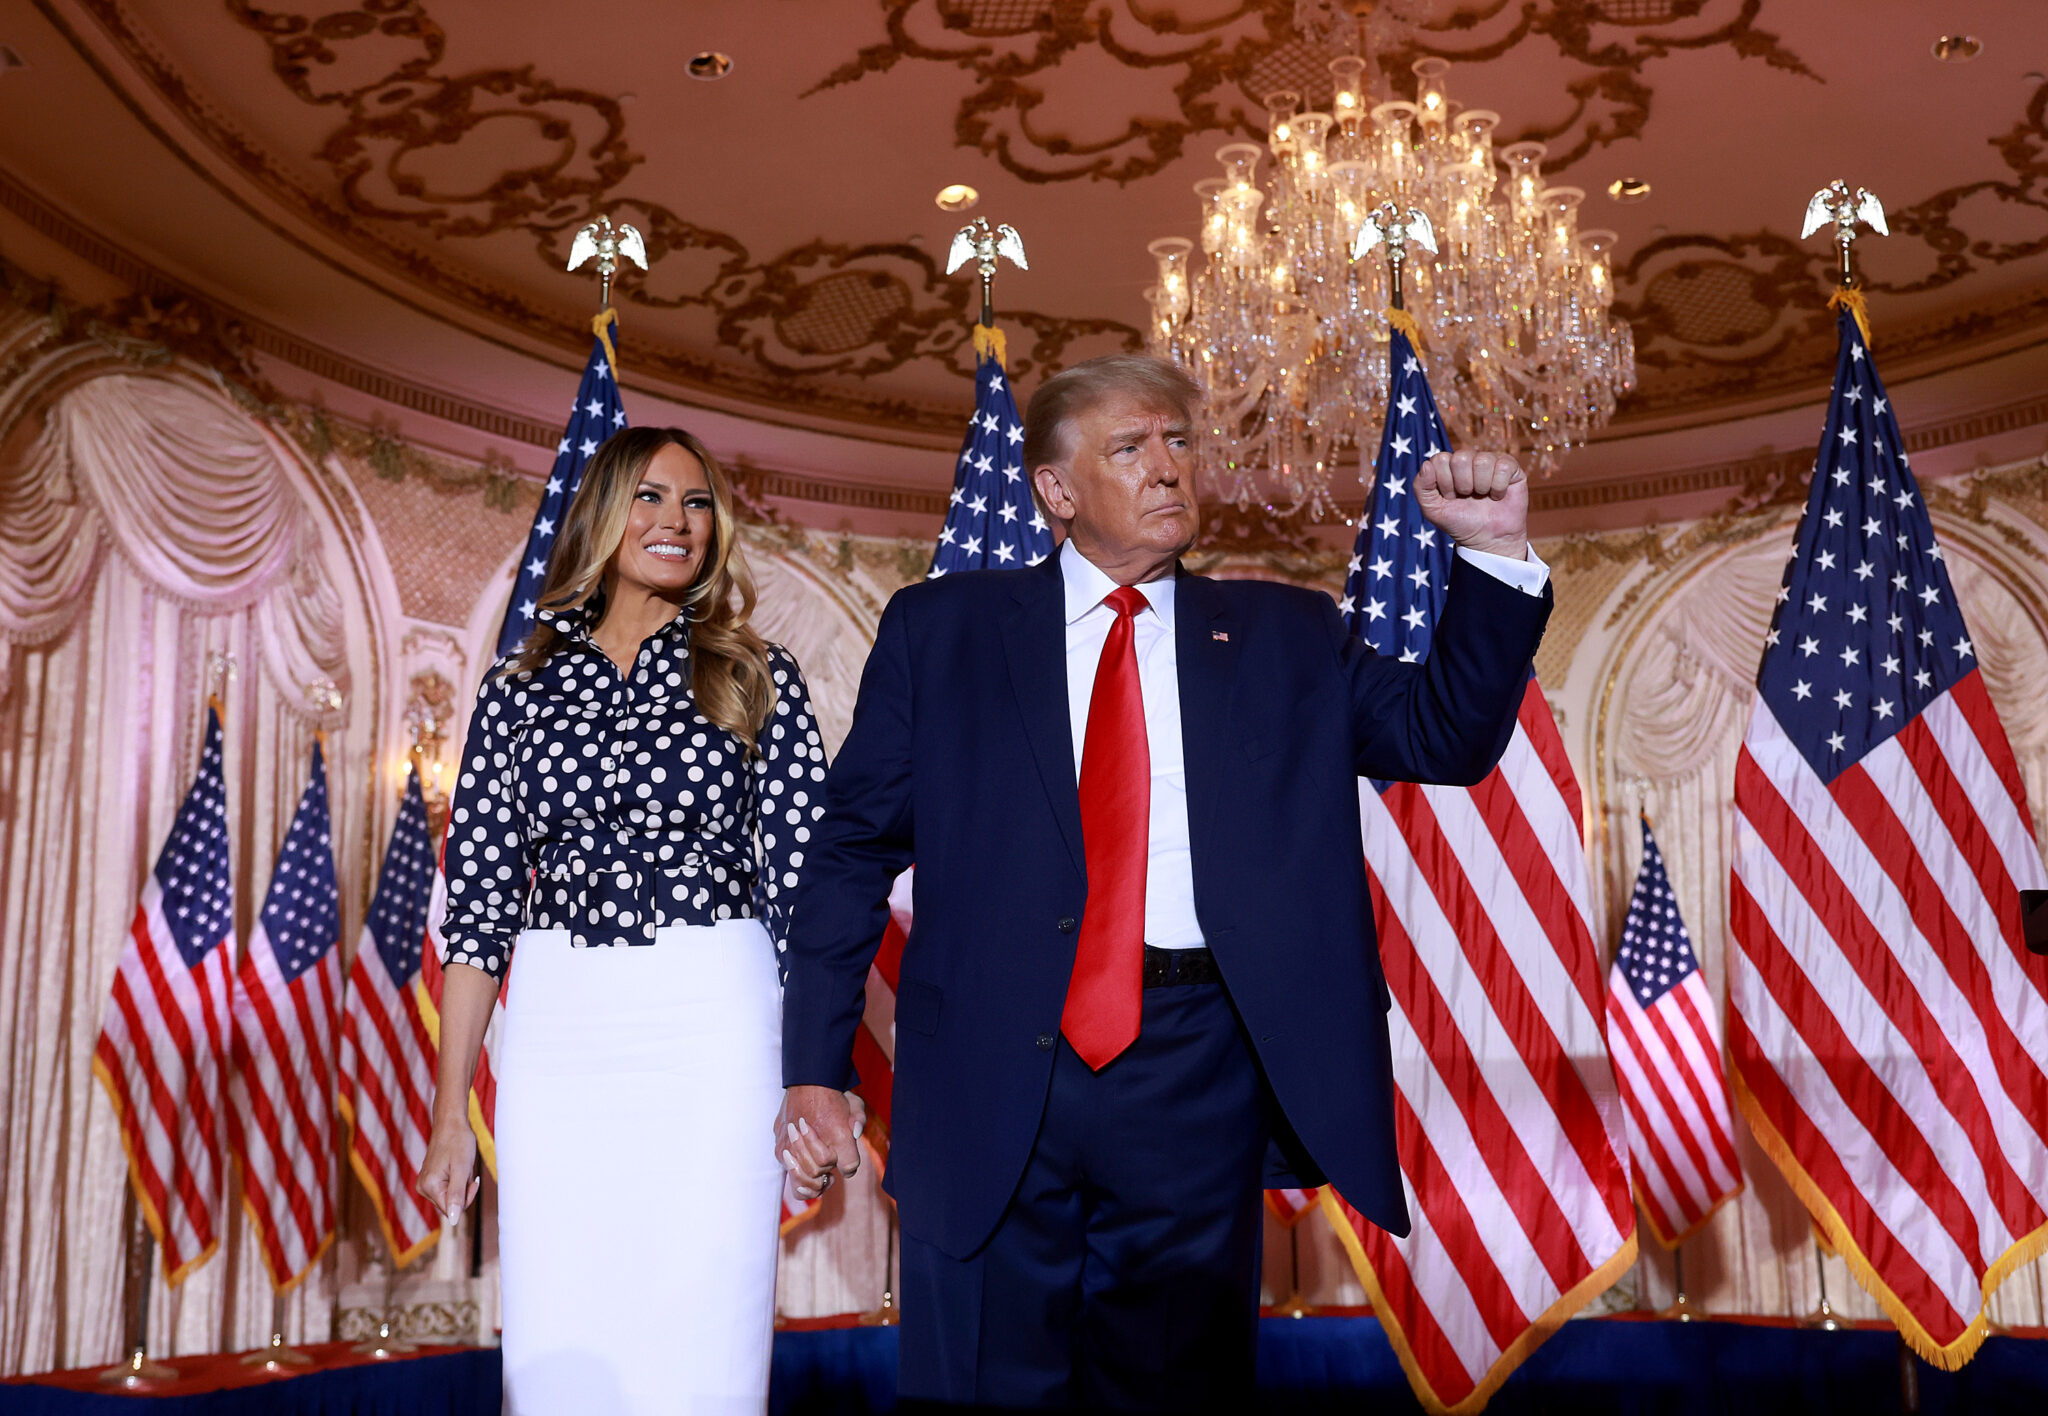 PALM BEACH, FLORIDA - NOVEMBER 15: Former U.S. President Donald Trump and former first lady Melania Trump stand together during an event at his Mar-a-Lago home on November 15, 2022 in Palm Beach, Florida. Trump announced that he was seeking another term in office and officially launched his 2024 presidential campaign.  (Photo by Joe Raedle/Getty Images)